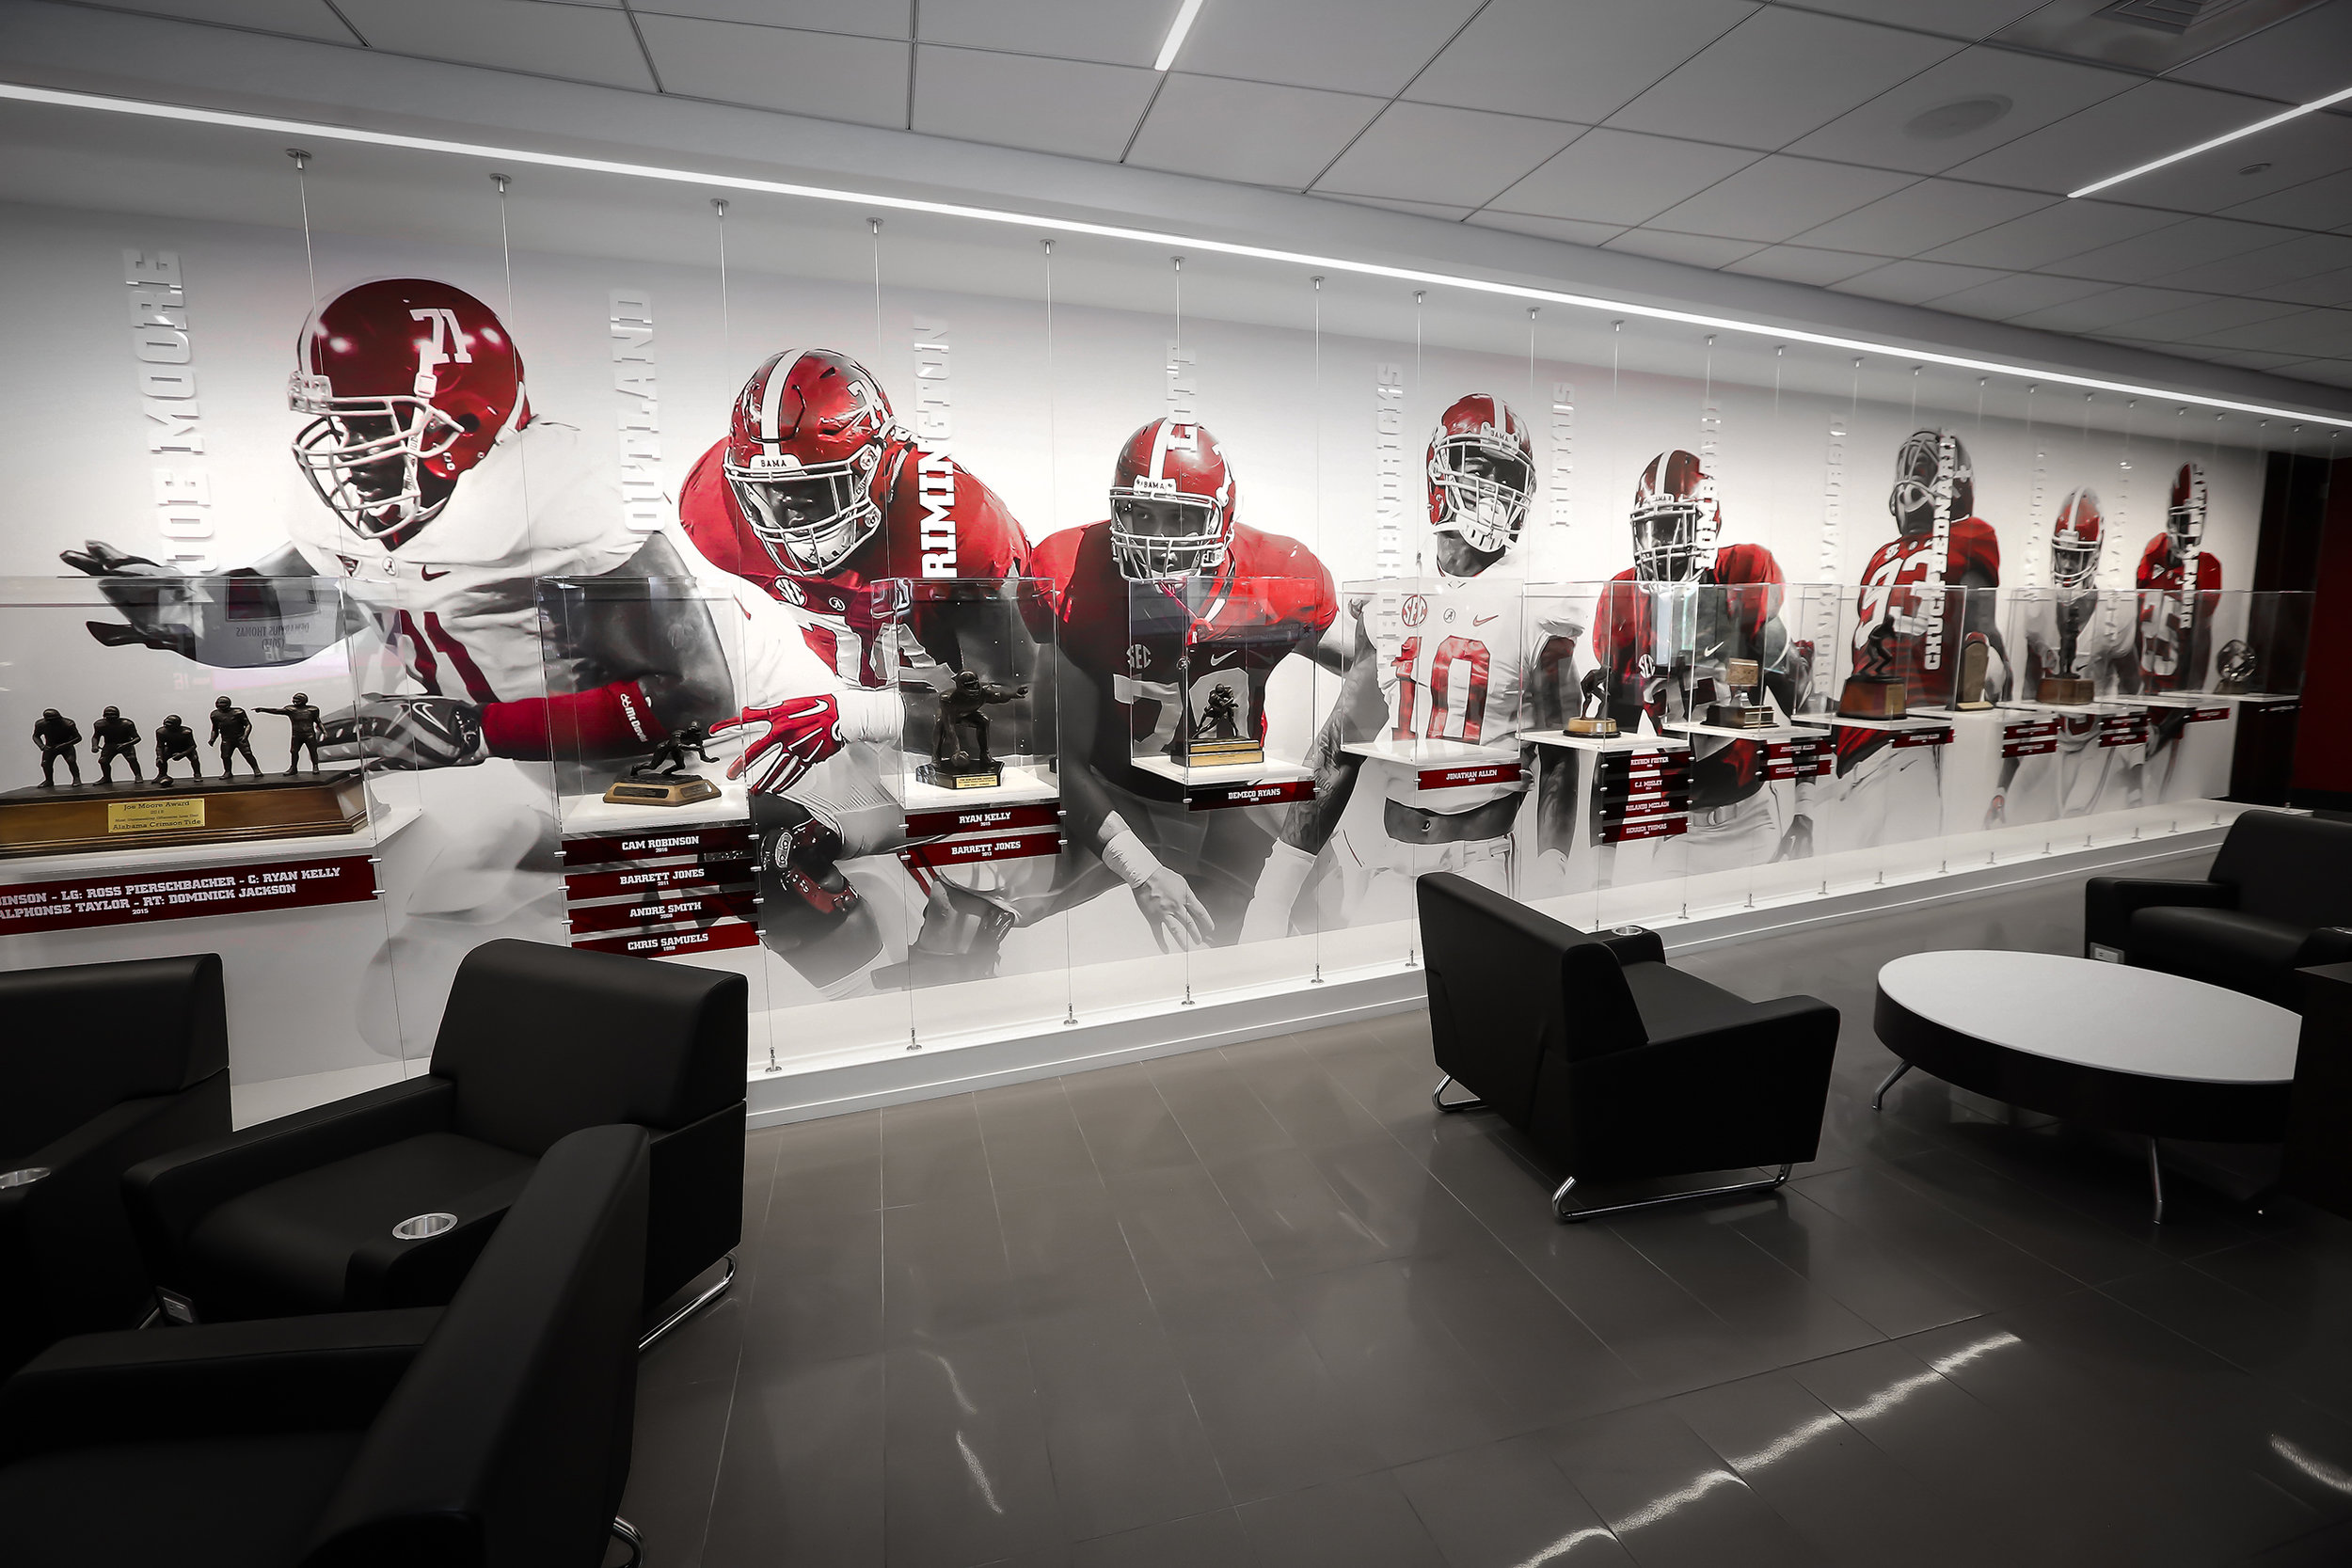 Alabama Football Trophy Cases (Forty Nine Degrees) on Behance